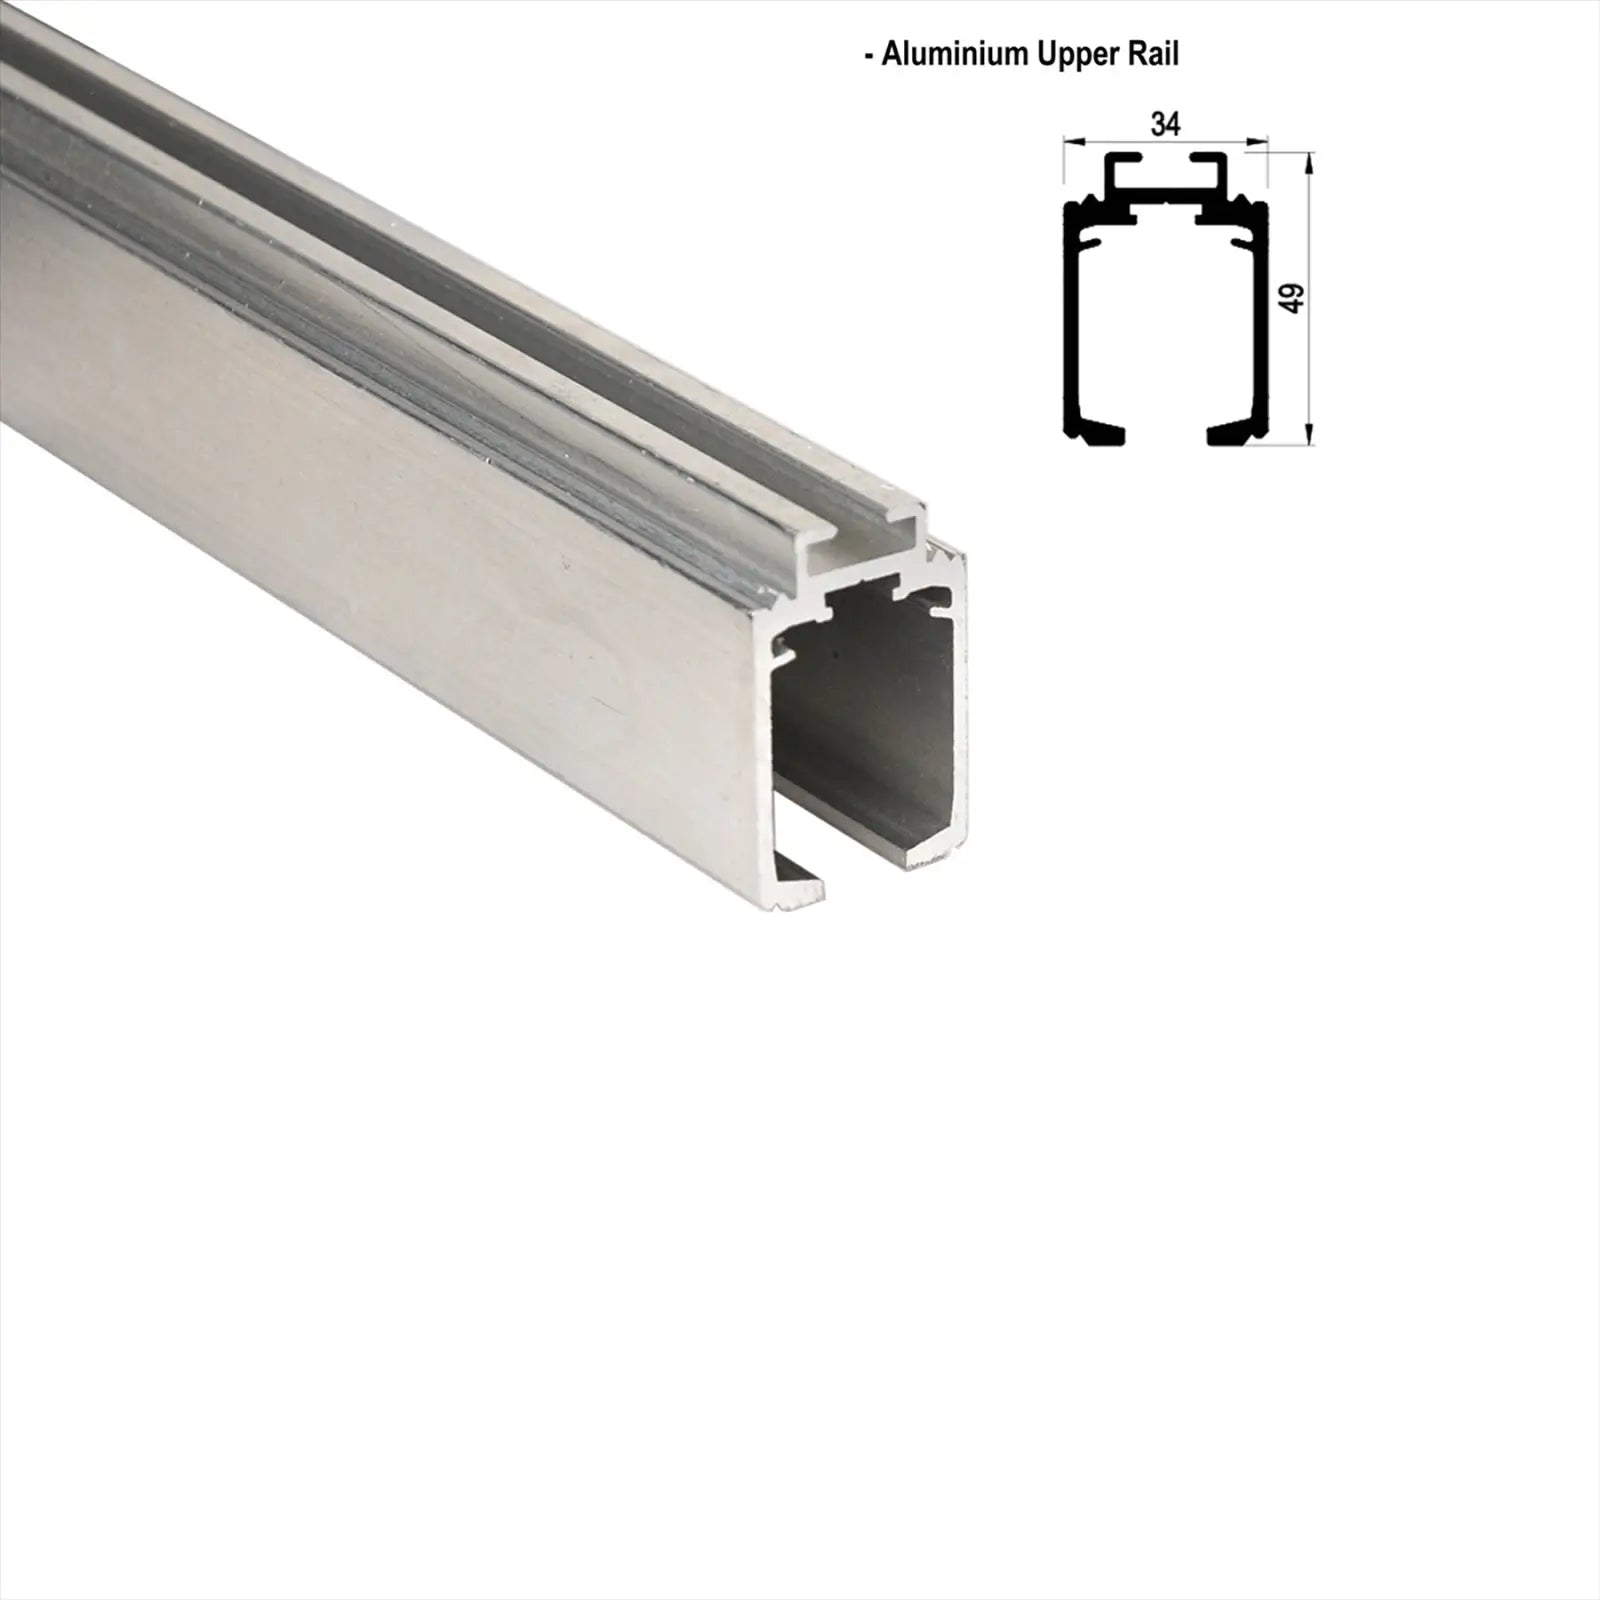 GS-Slide Top Hung Glass Sliding Door Kit - 3600mm Track - One Way Soft Close - Decor And Decor